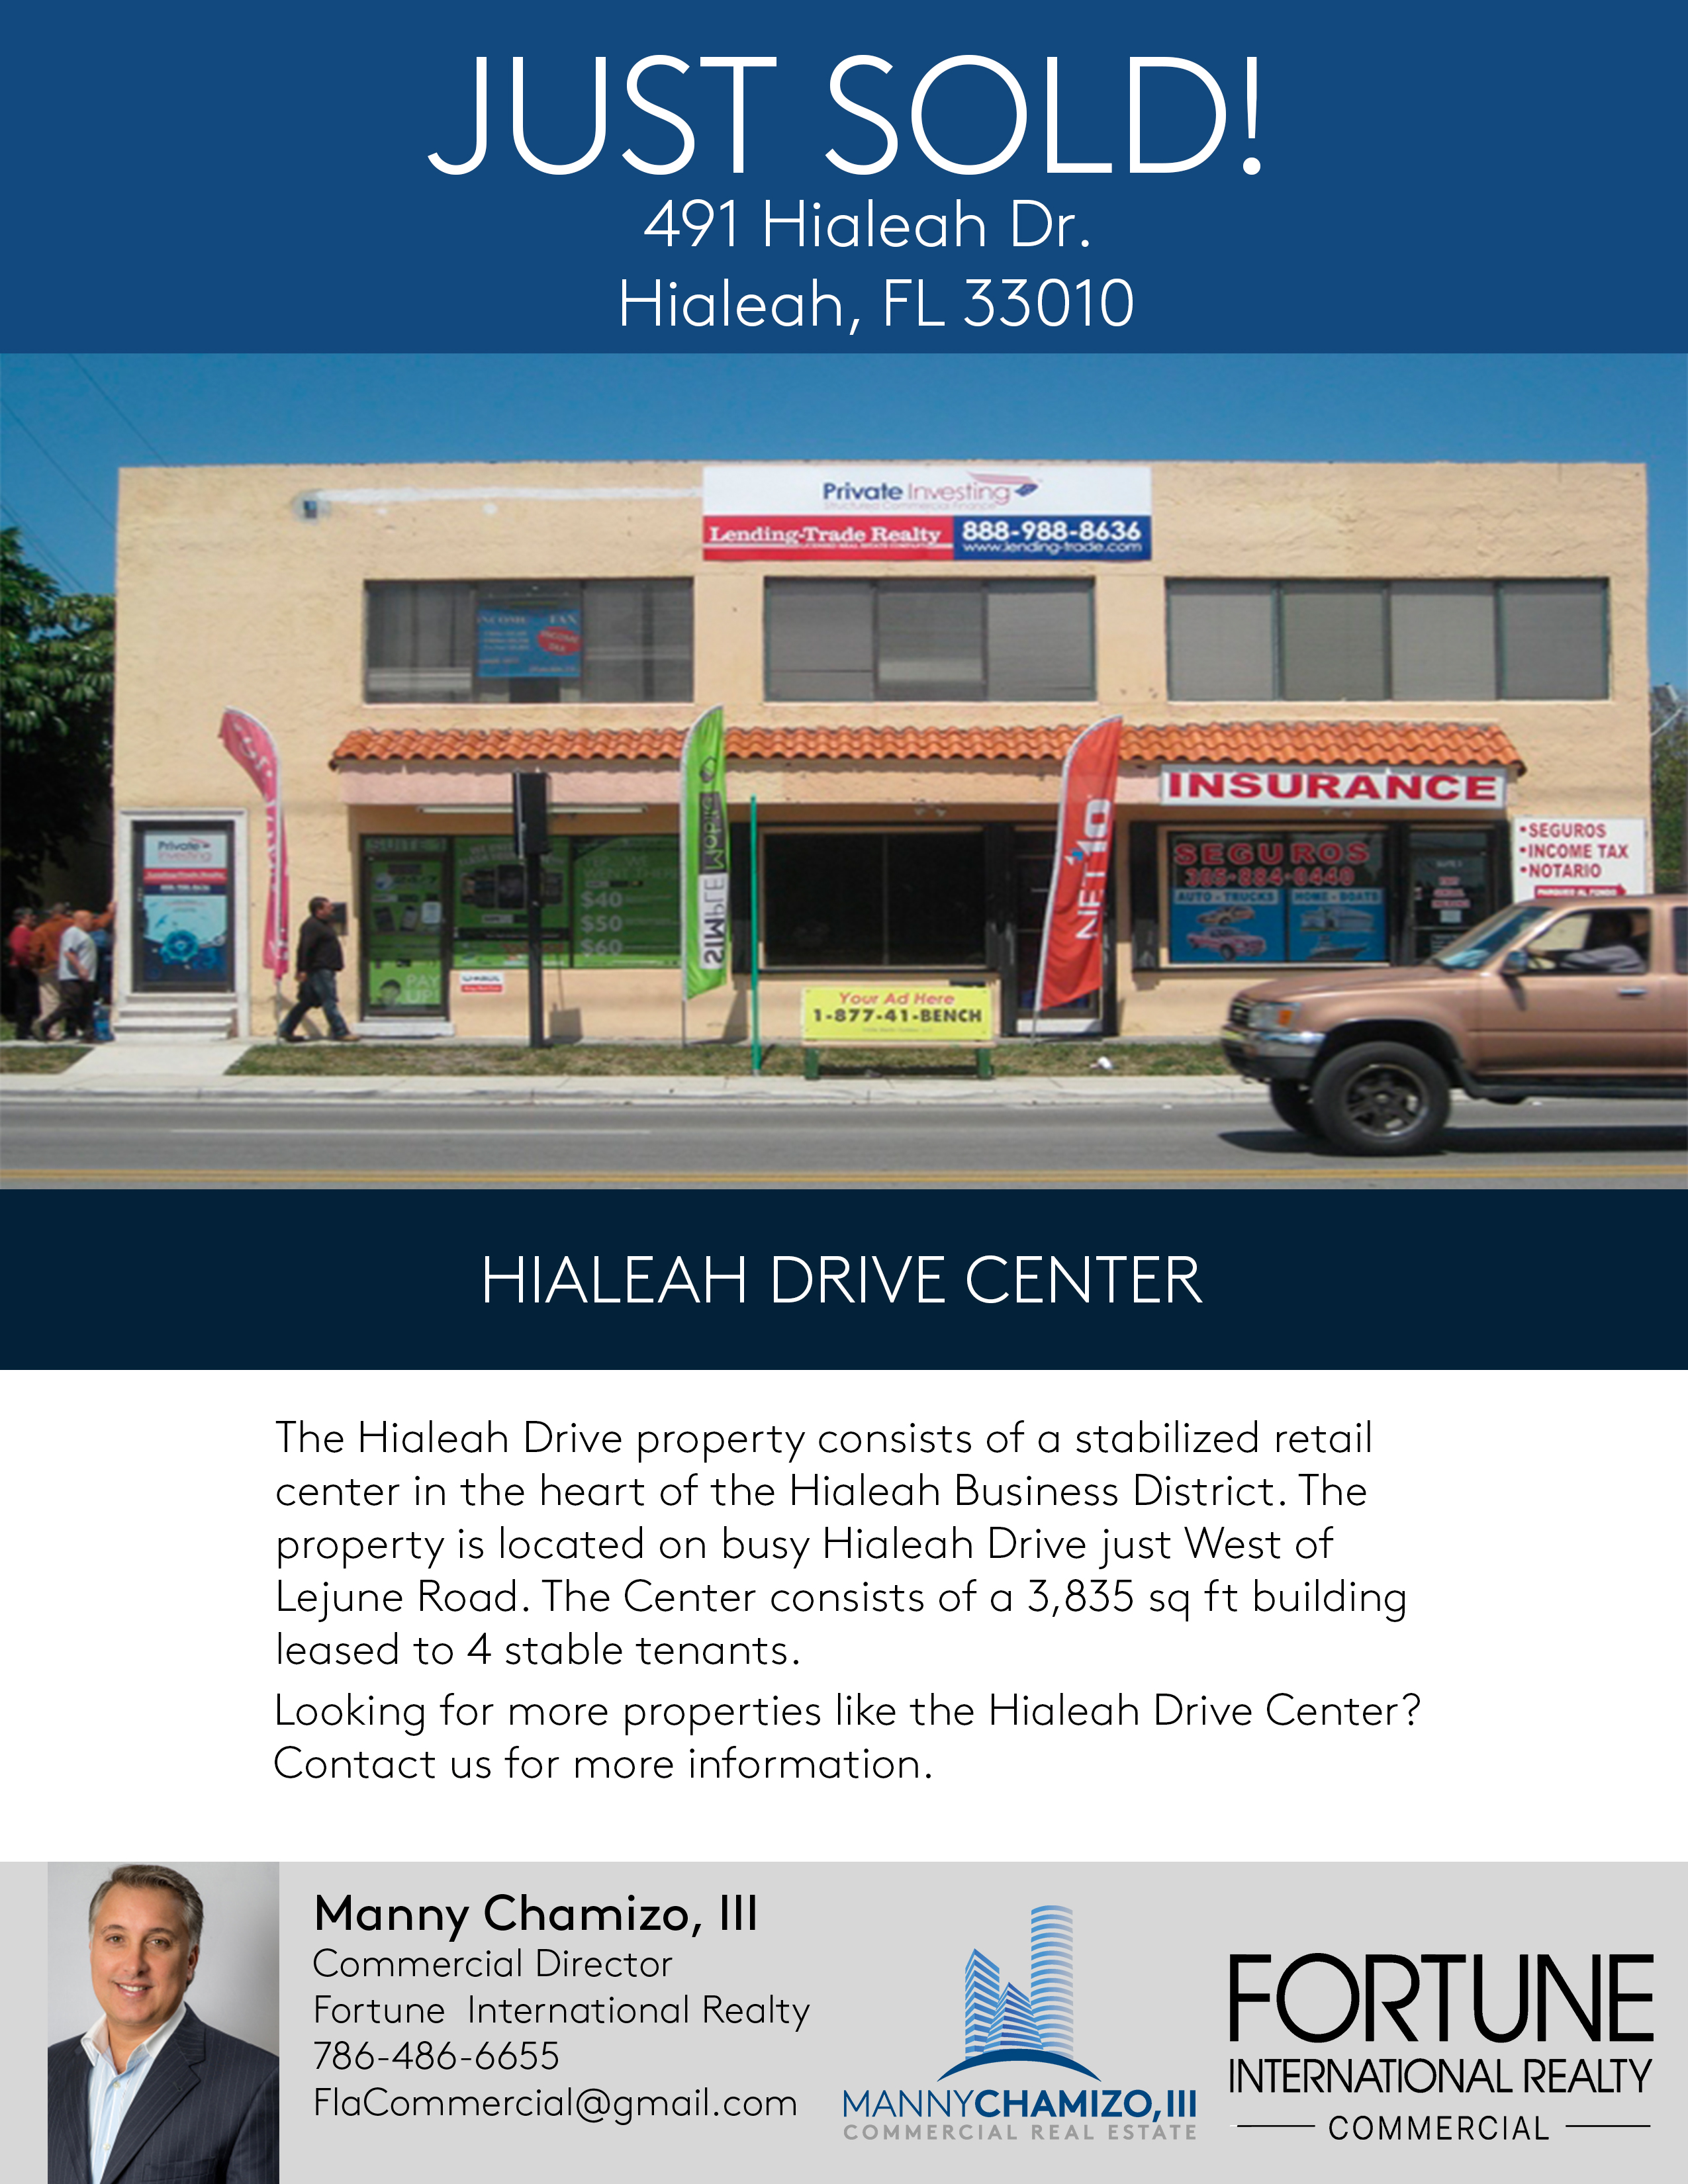 Just Sold! Hialeah Drive Center!